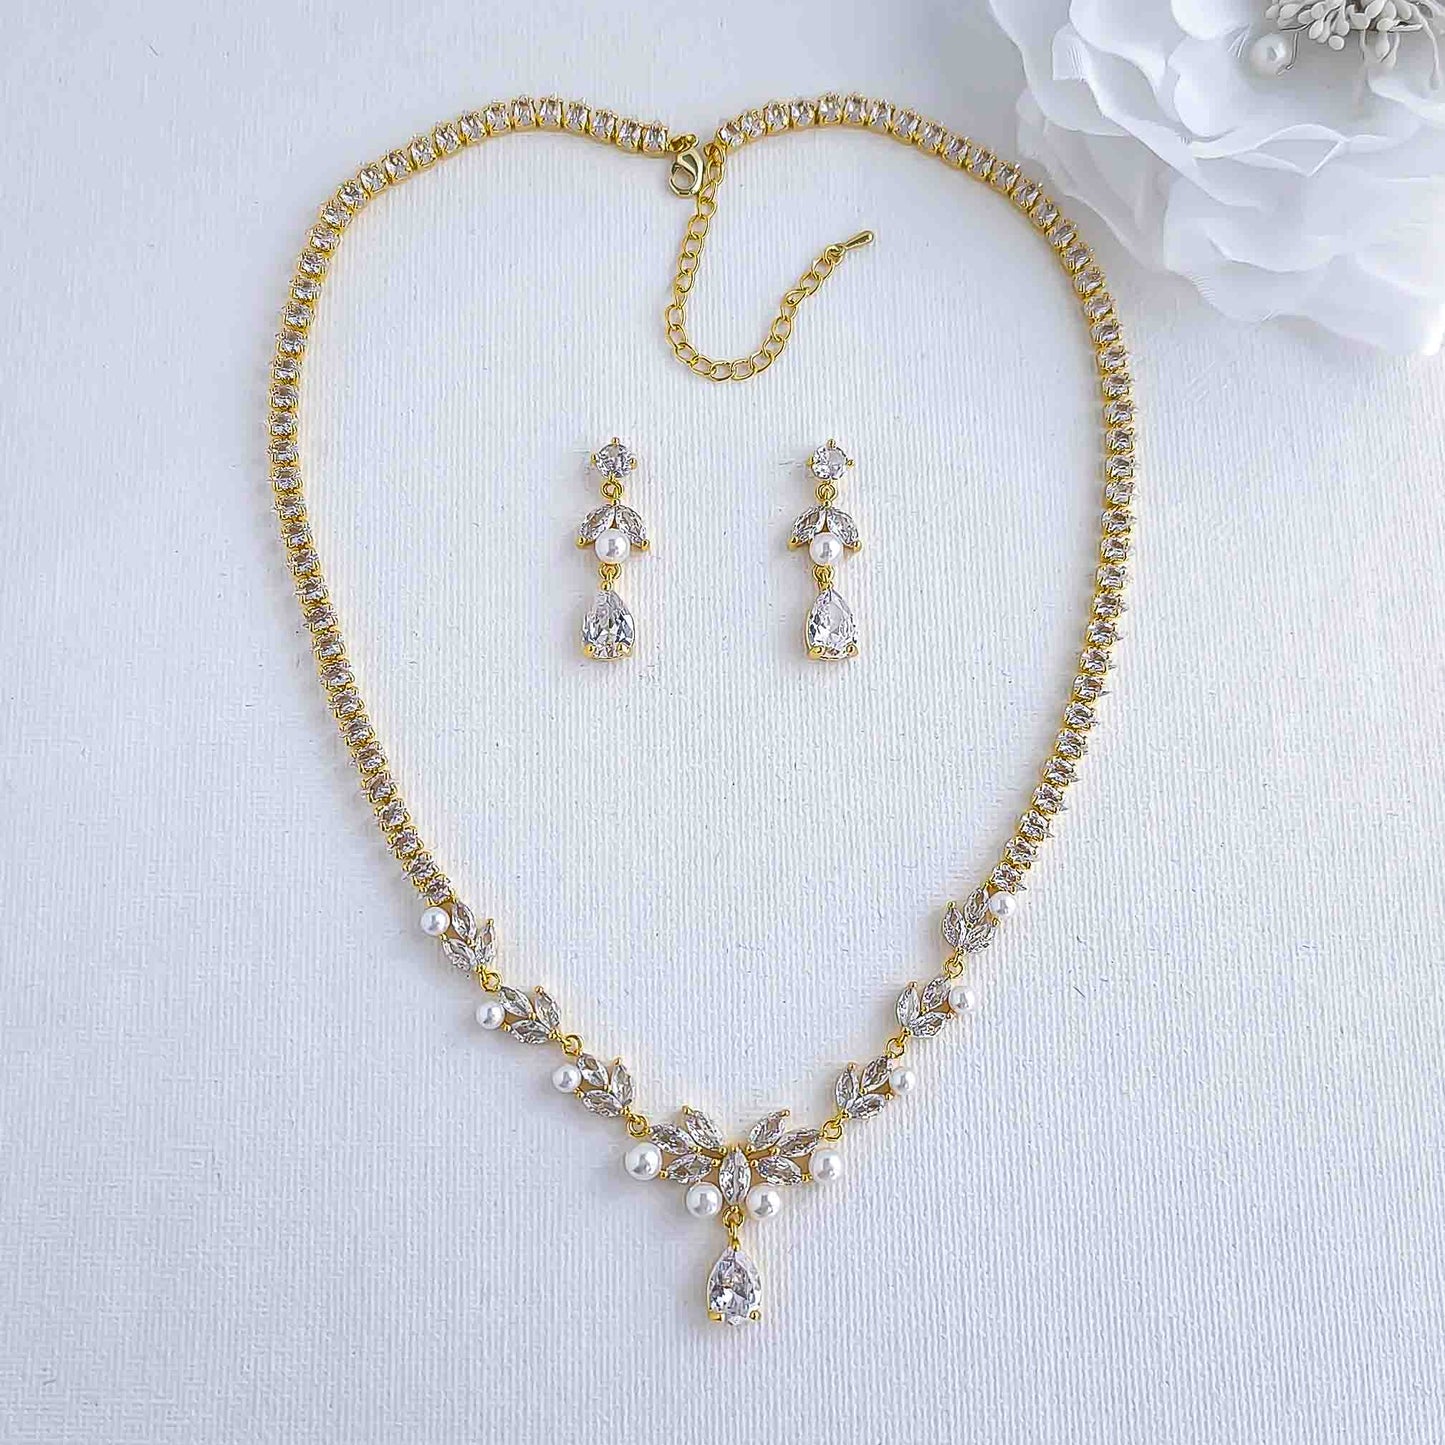 Pearl Wedding Jewelry Set of Necklace and Earrings-Jenna